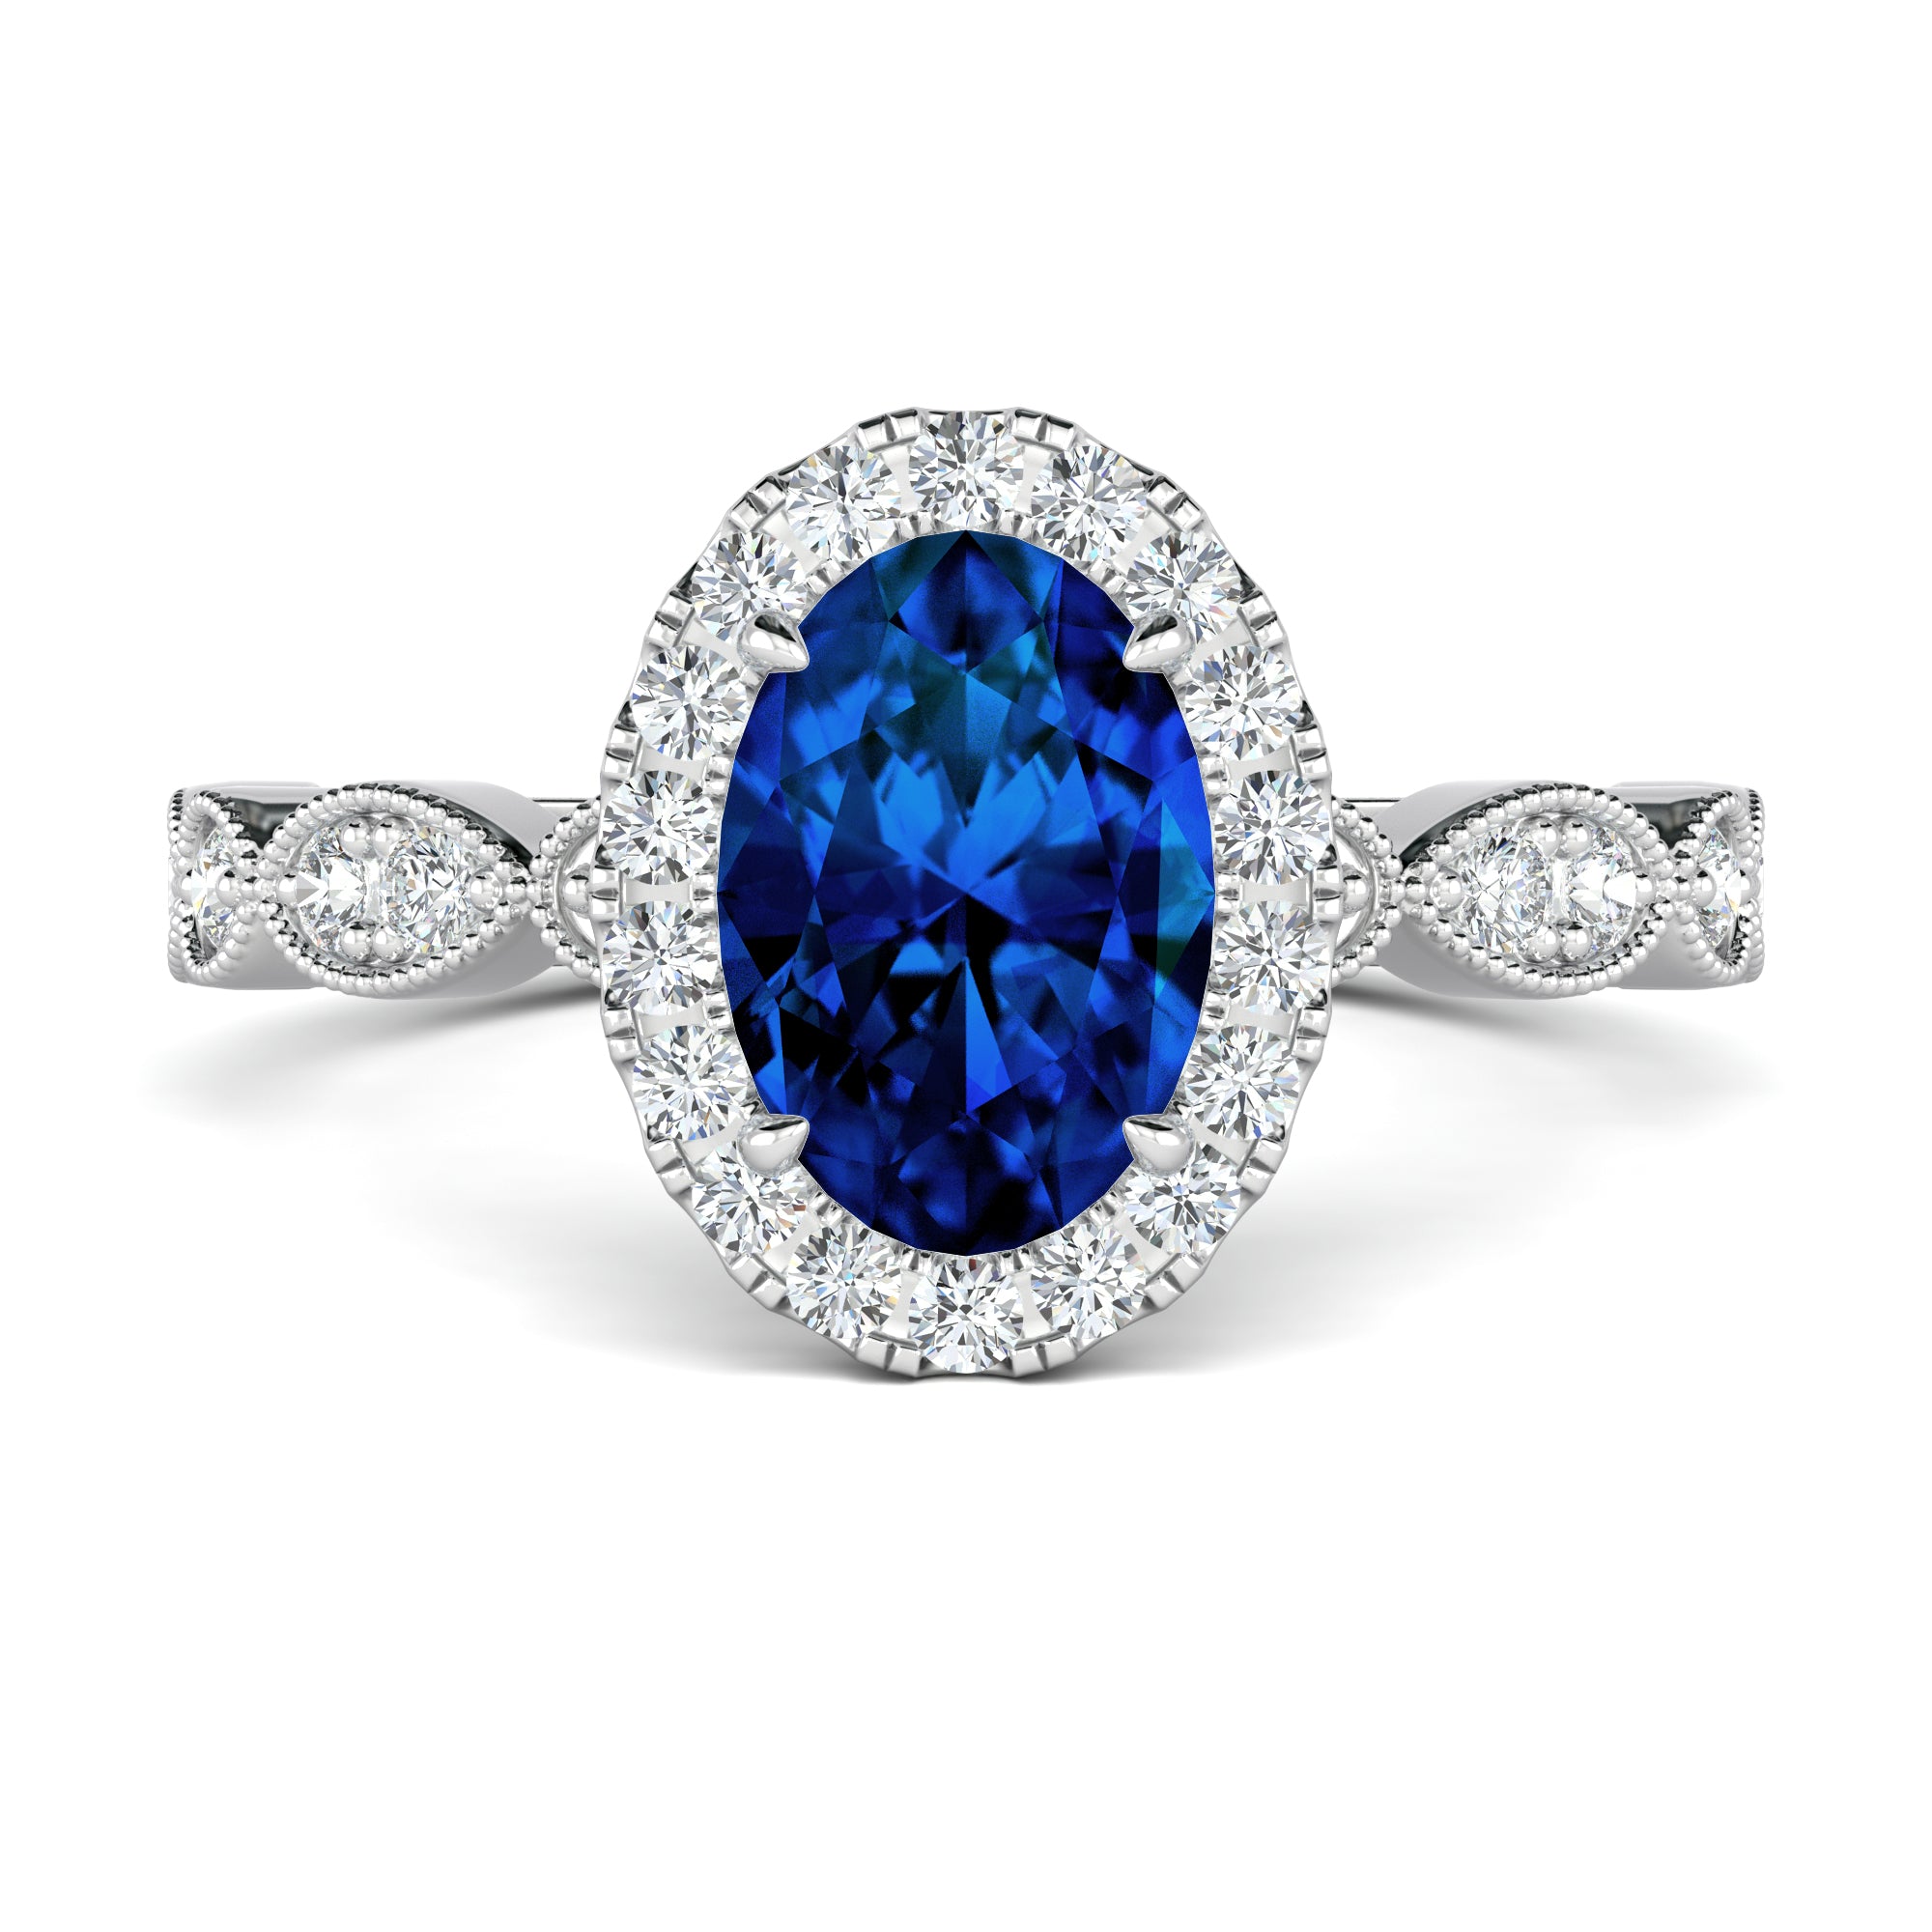 Antique style halo engagement ring with oval blue sapphire and milgrain finish